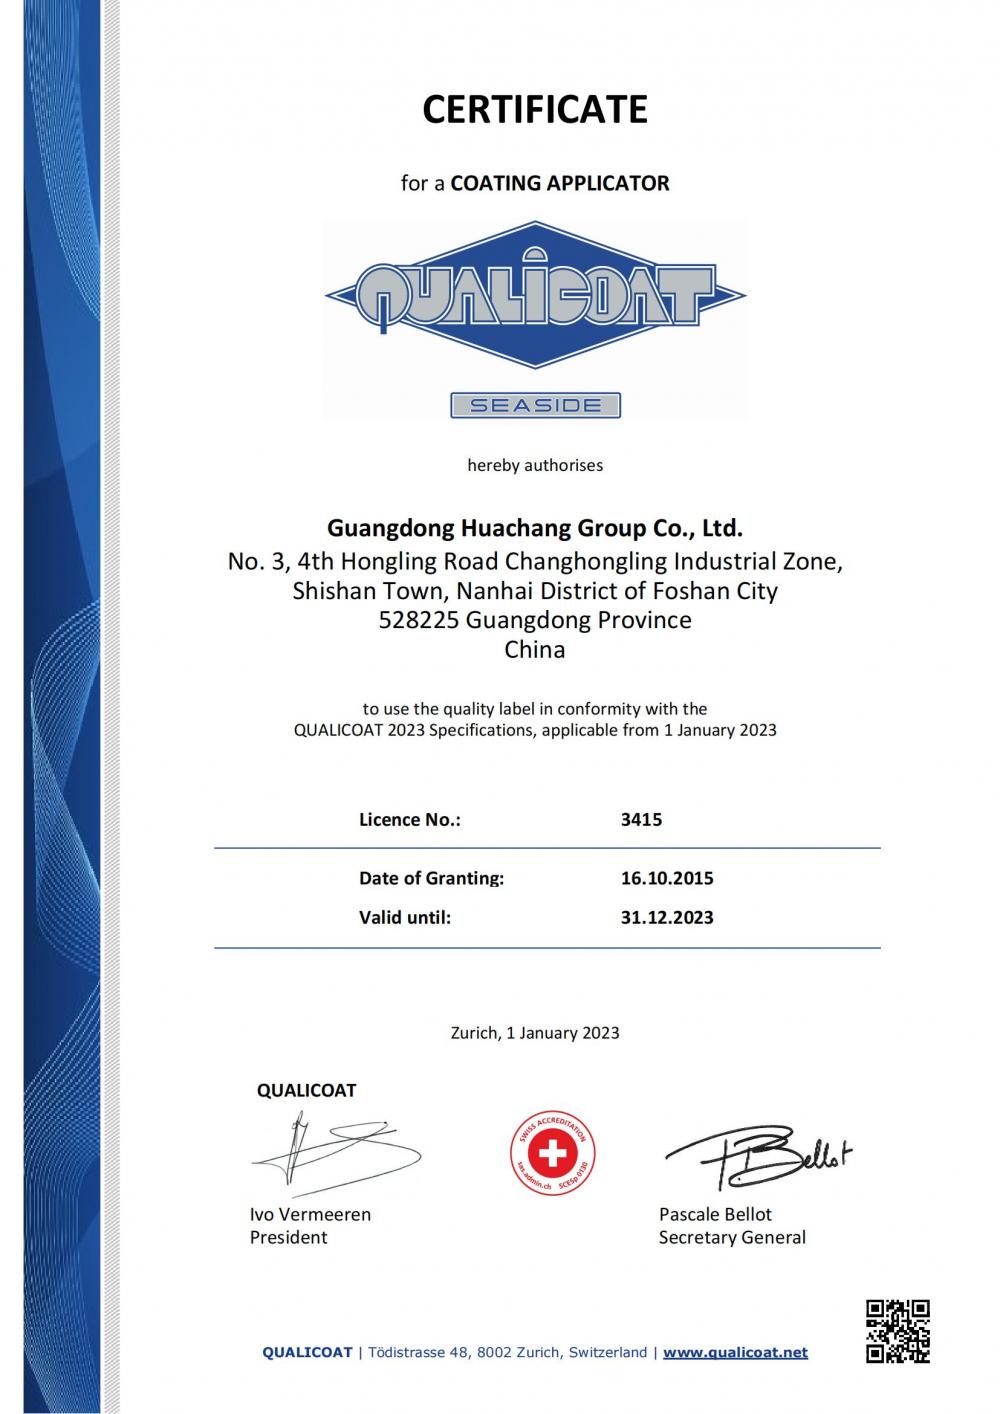 CERTIFICATE for a COATING APPLICATOR